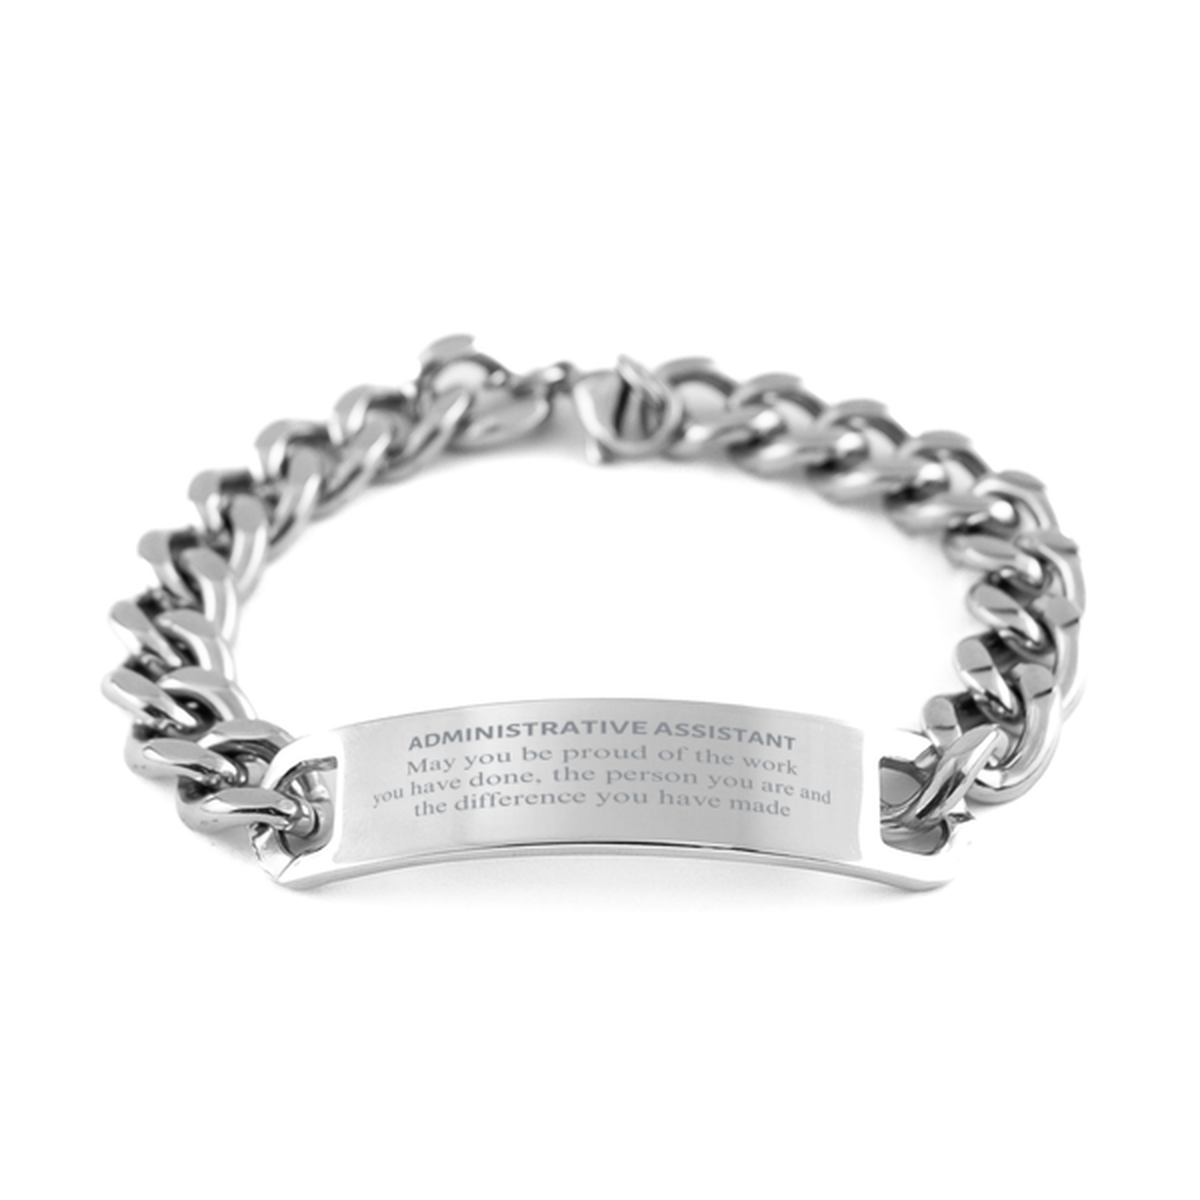 Administrative Assistant May you be proud of the work you have done, Retirement Administrative Assistant Cuban Chain Stainless Steel Bracelet for Colleague Appreciation Gifts Amazing for Administrative Assistant